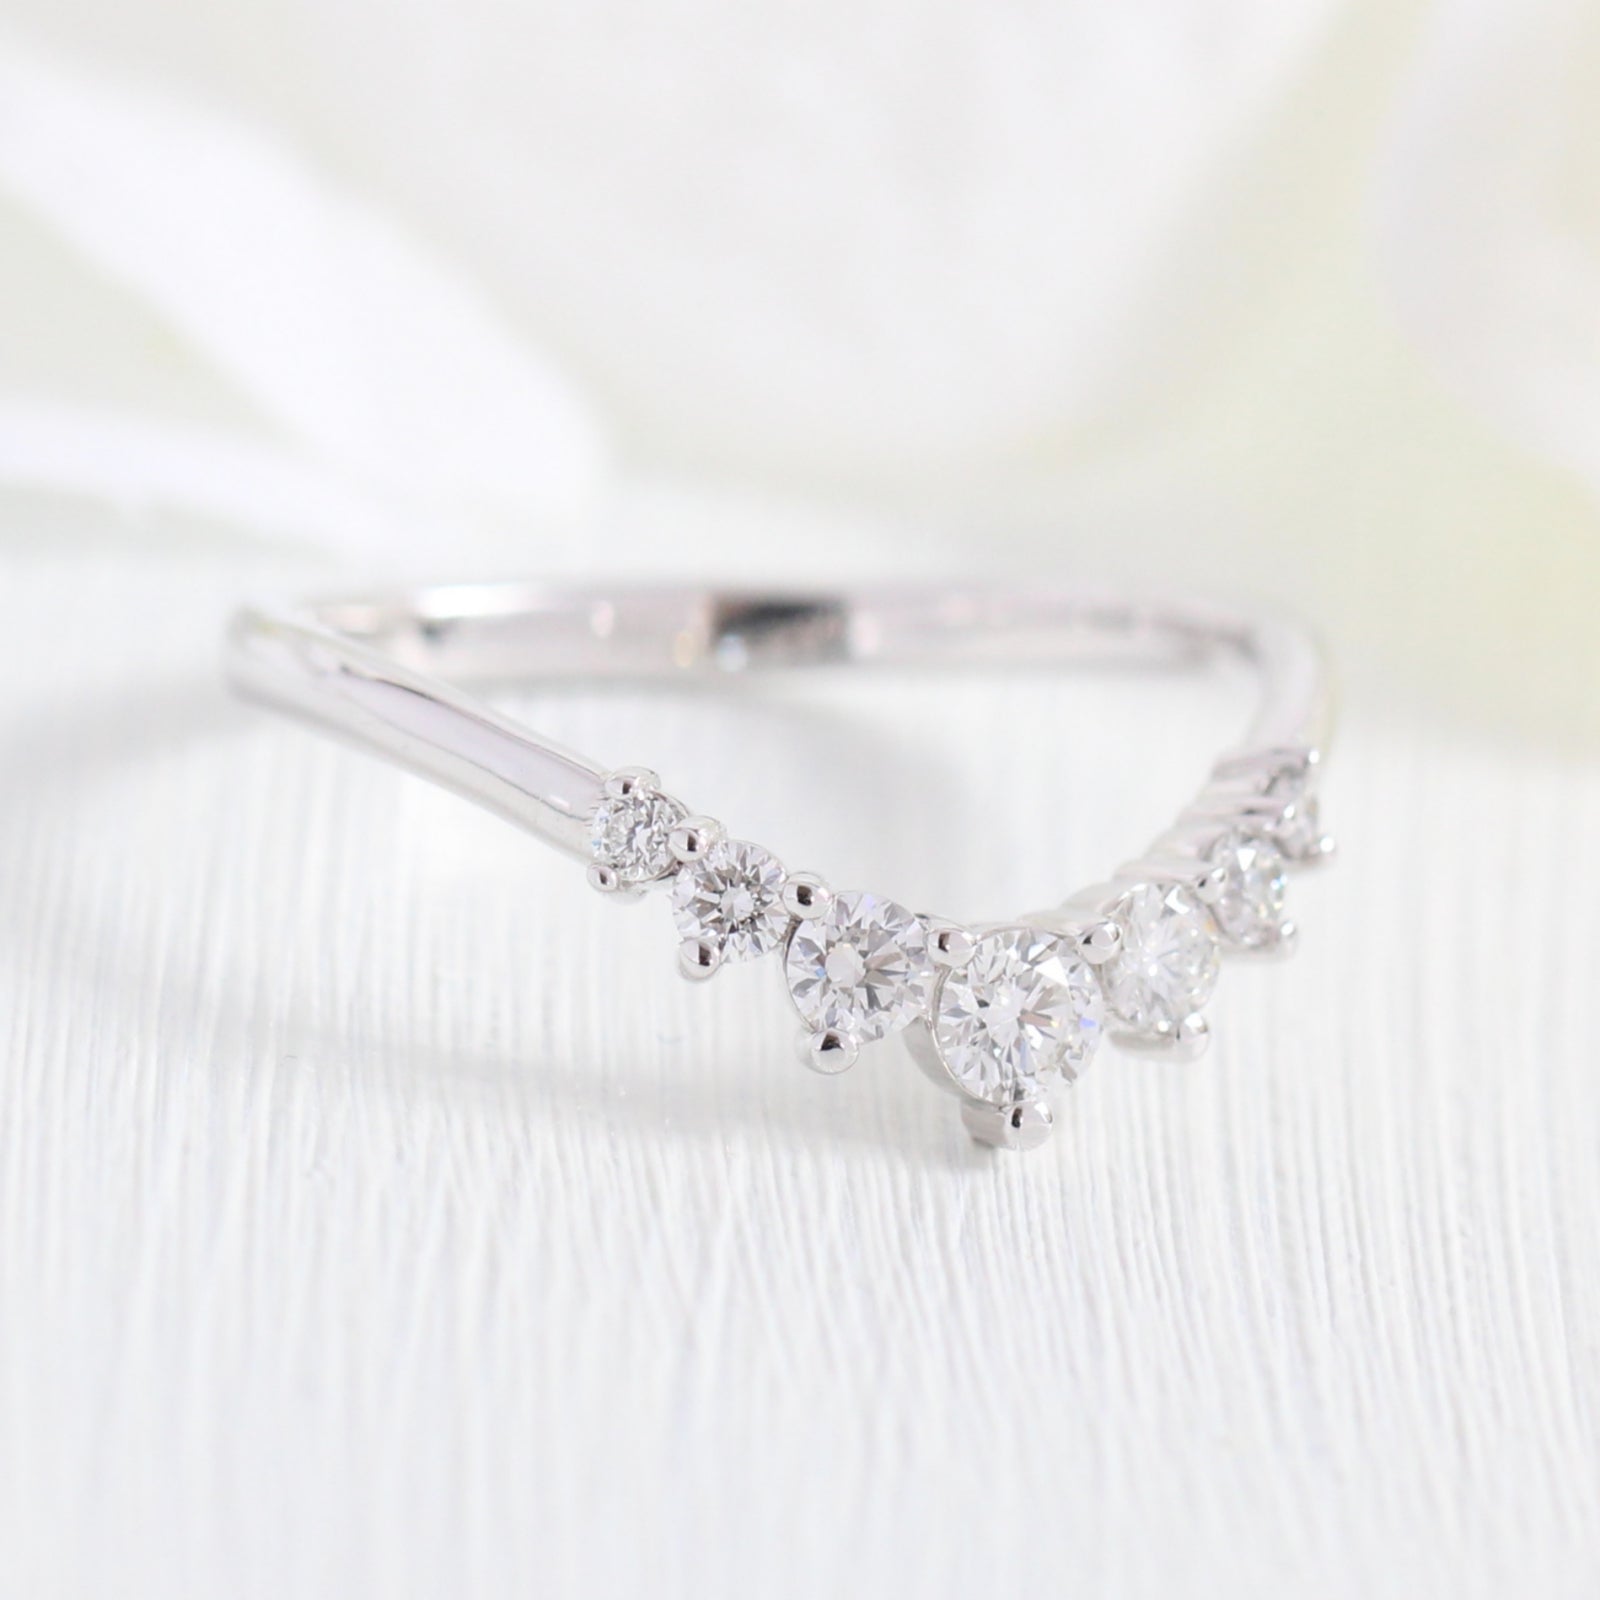 white gold curved diamond wedding ring in 7 stone diamond wedding band by la more design jewelry